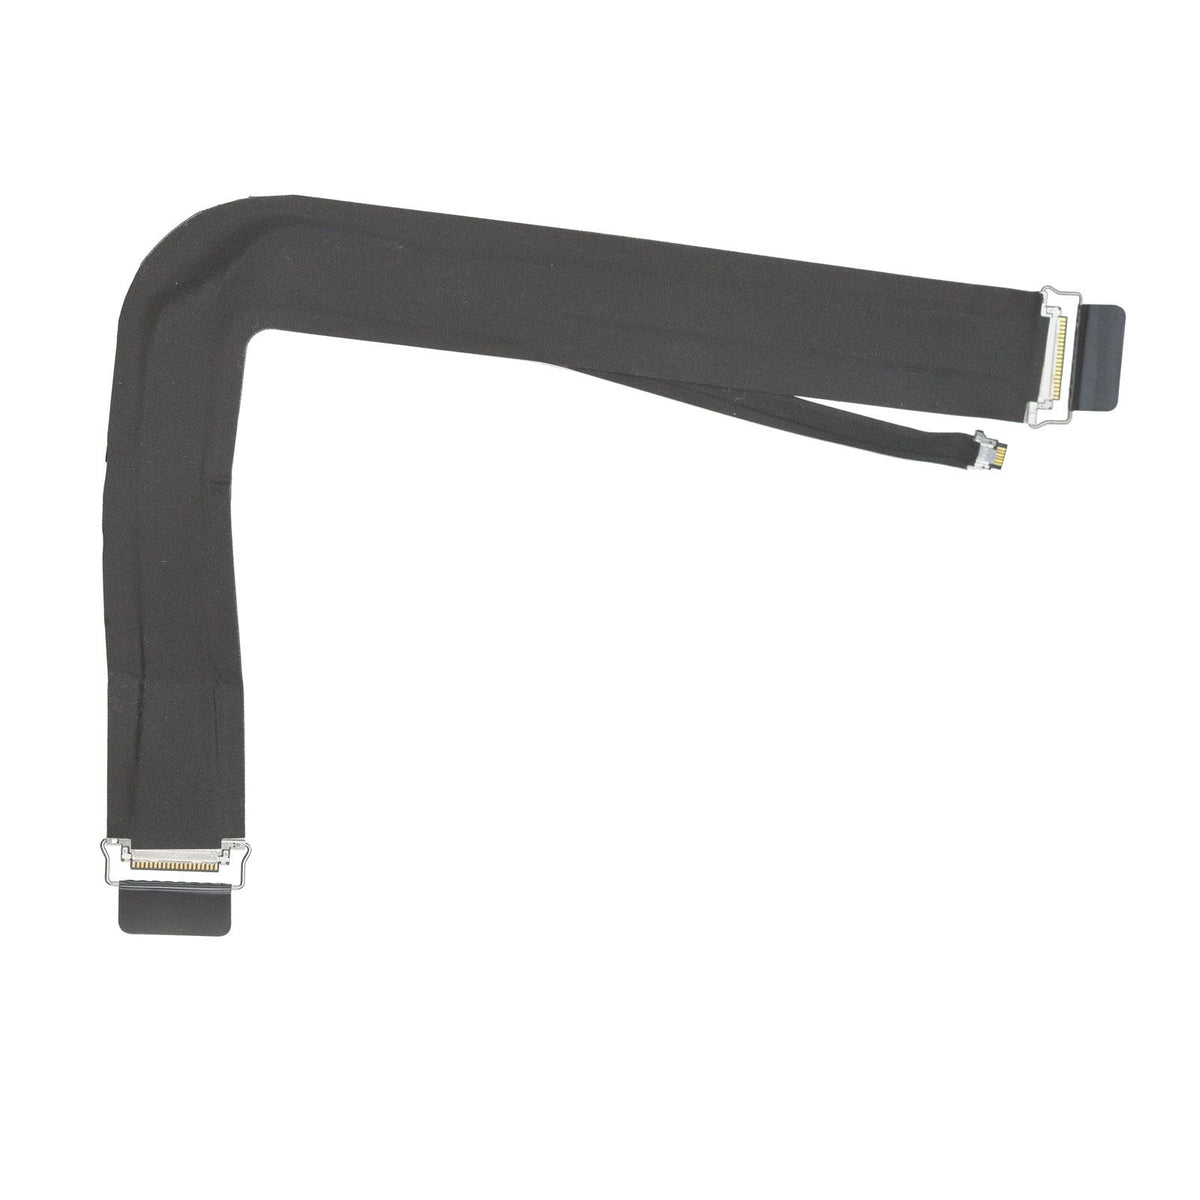 ISIGHT CAMERA & MICROPHONE CABLE FOR IMAC 21.5" A1418 (LATE 2012, MID 2014)